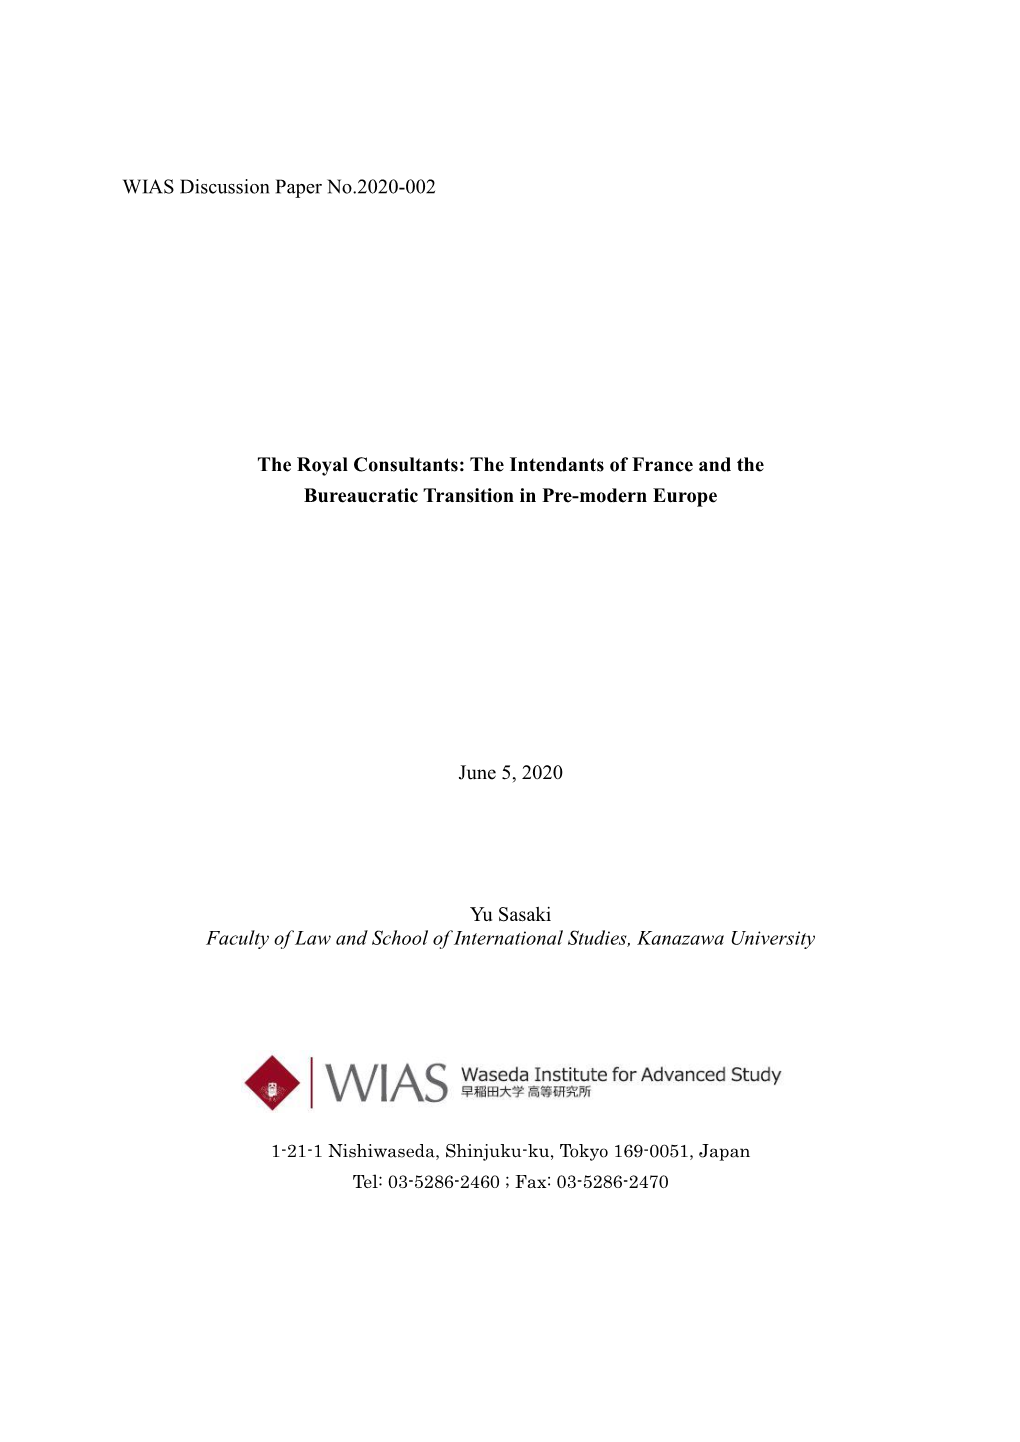 WIAS Discussion Paper No.2020-002 the Royal Consultants